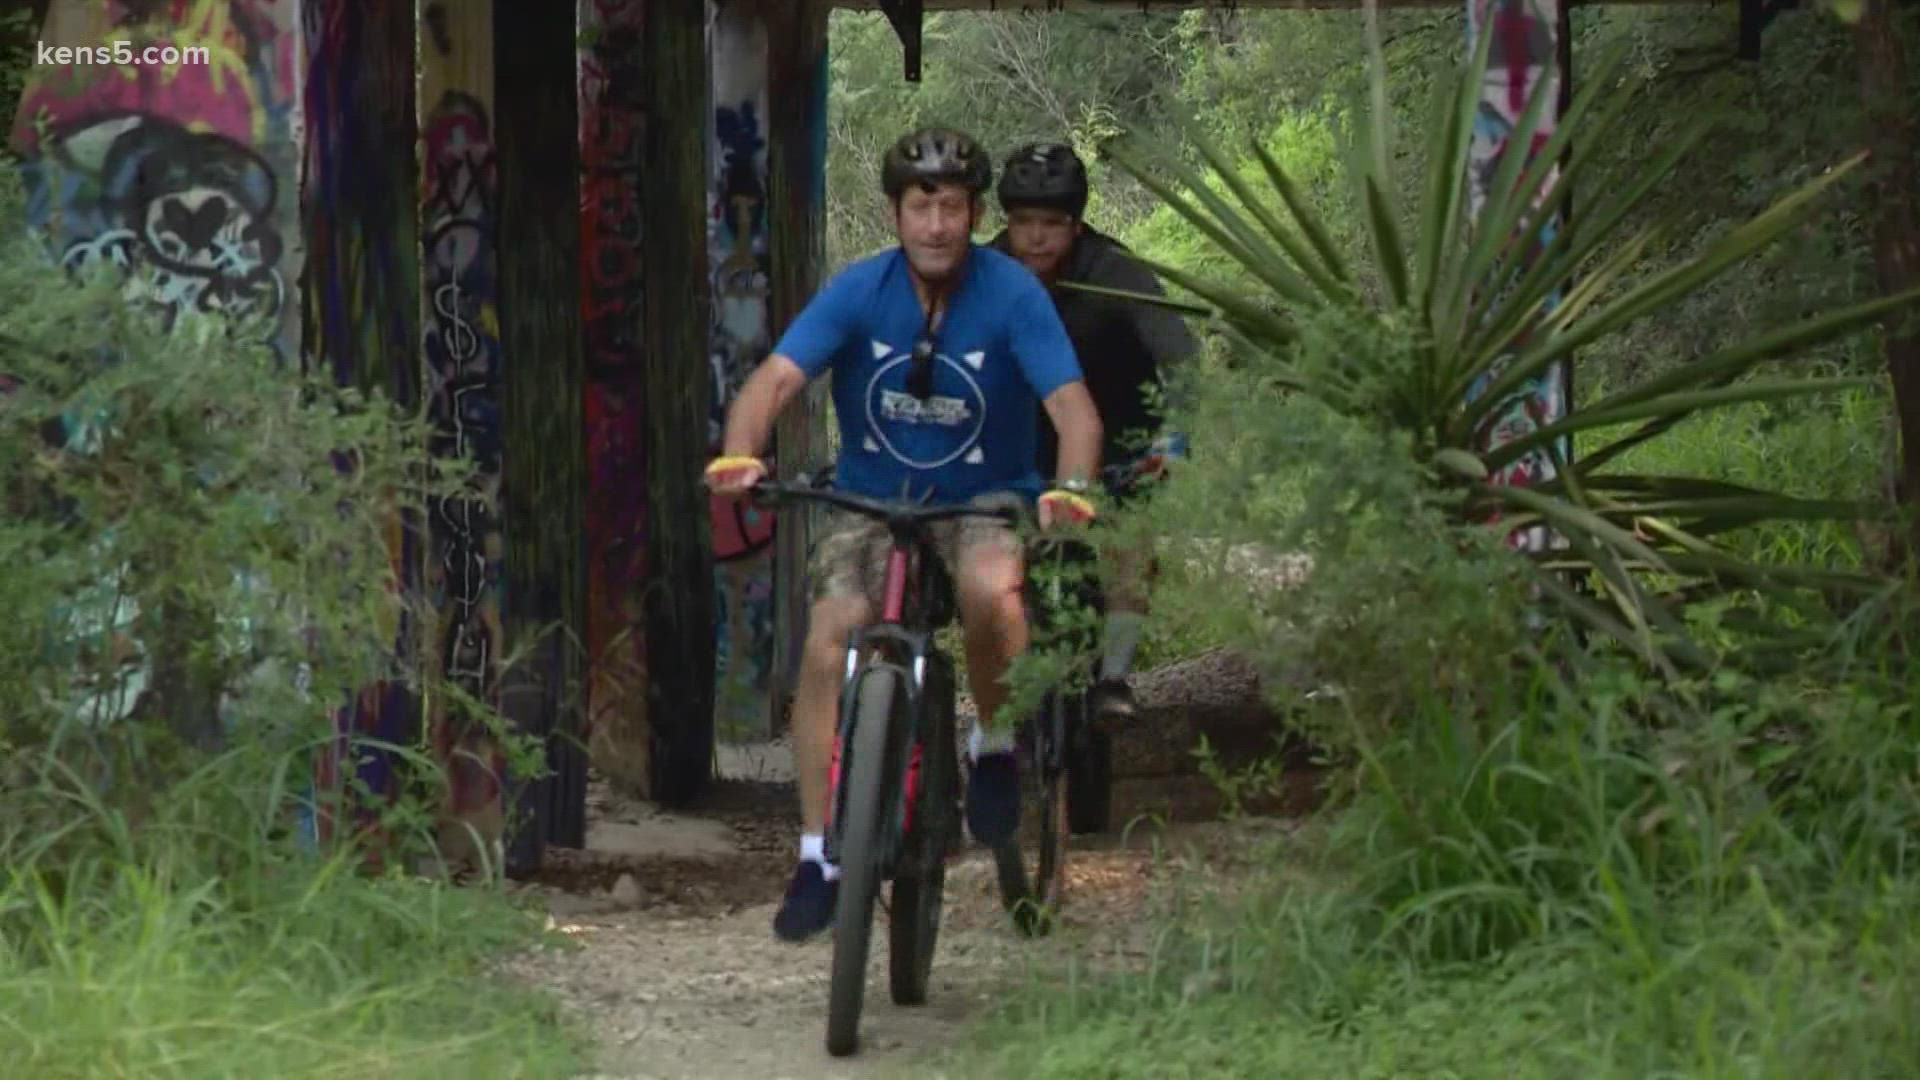 Barry Davis went for a ride with members of the South Texas Off Road Mountain Bikers.